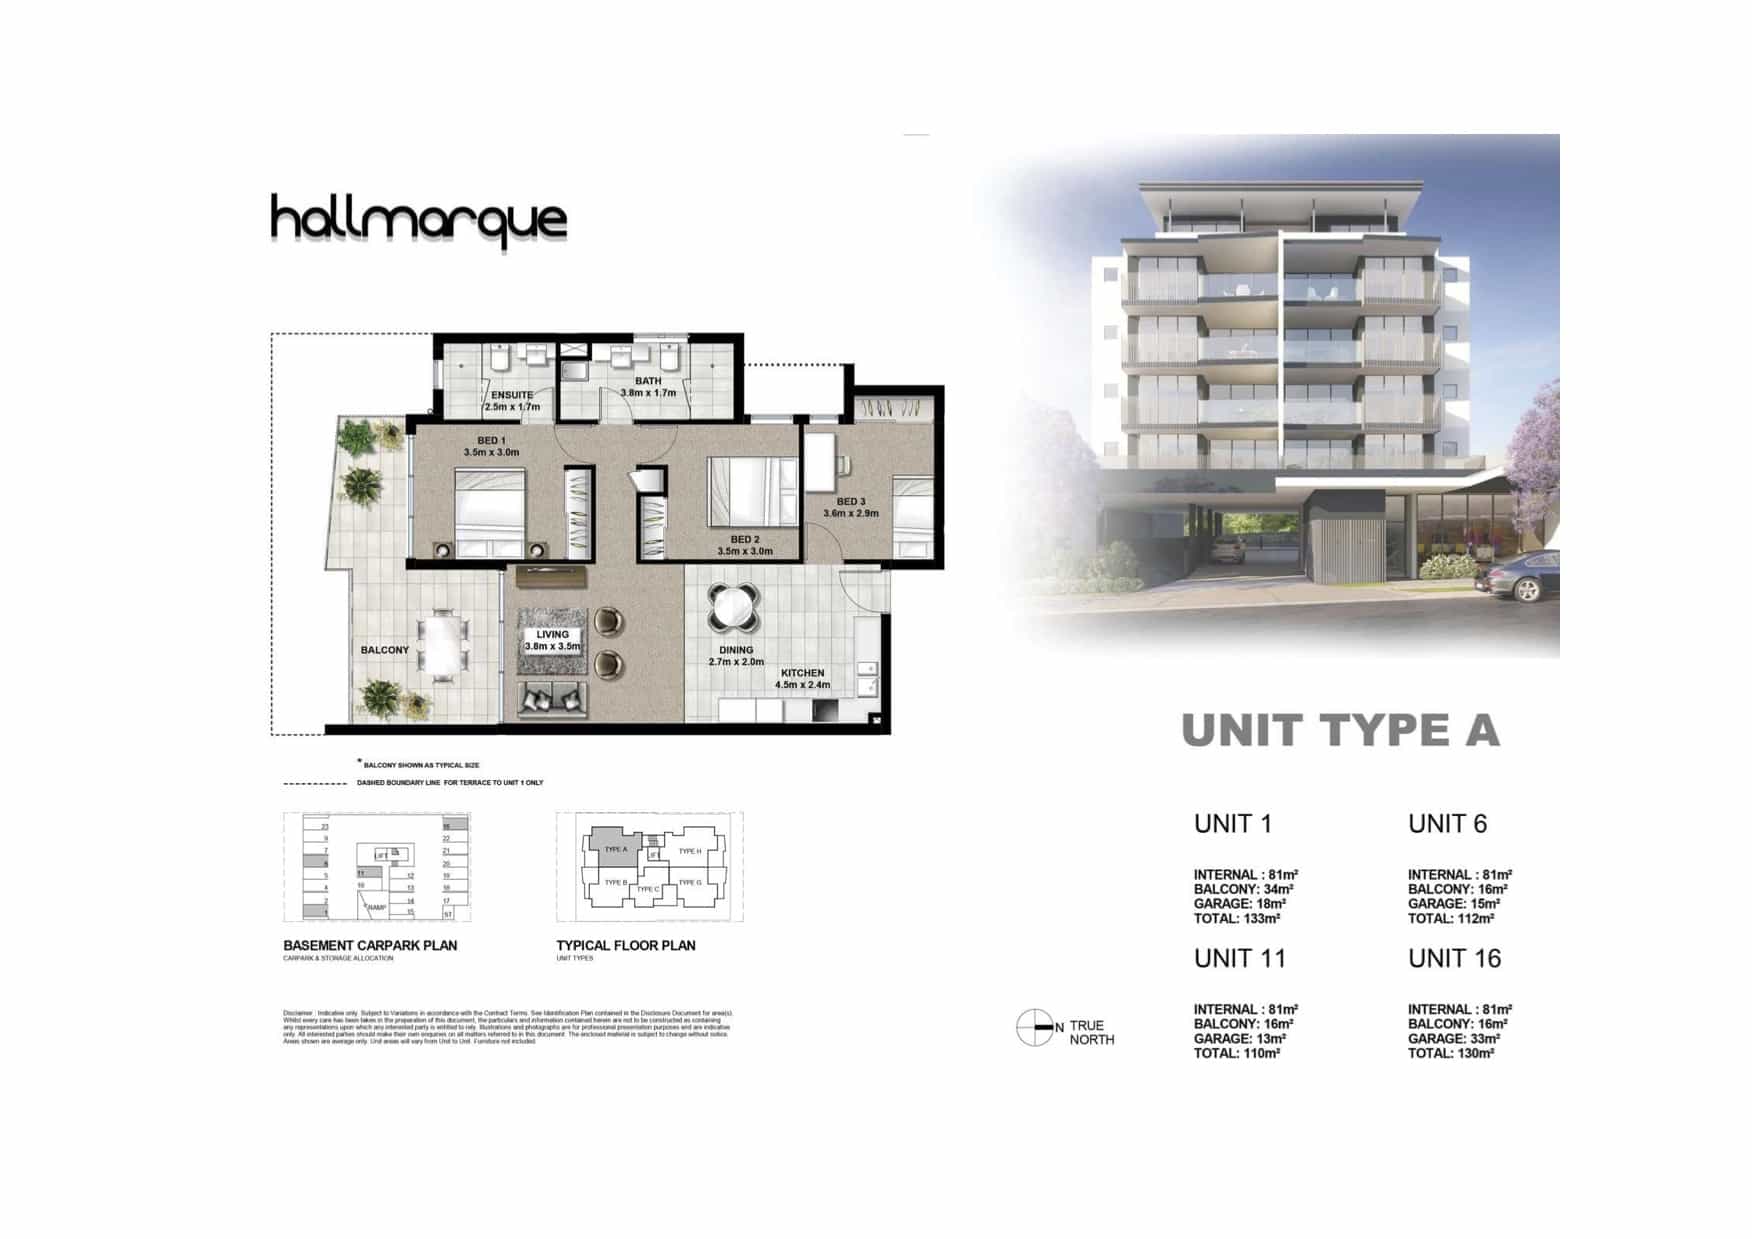 Hallmarque 3 Bedroom Apartment Brisbane . Bed 3 can be office